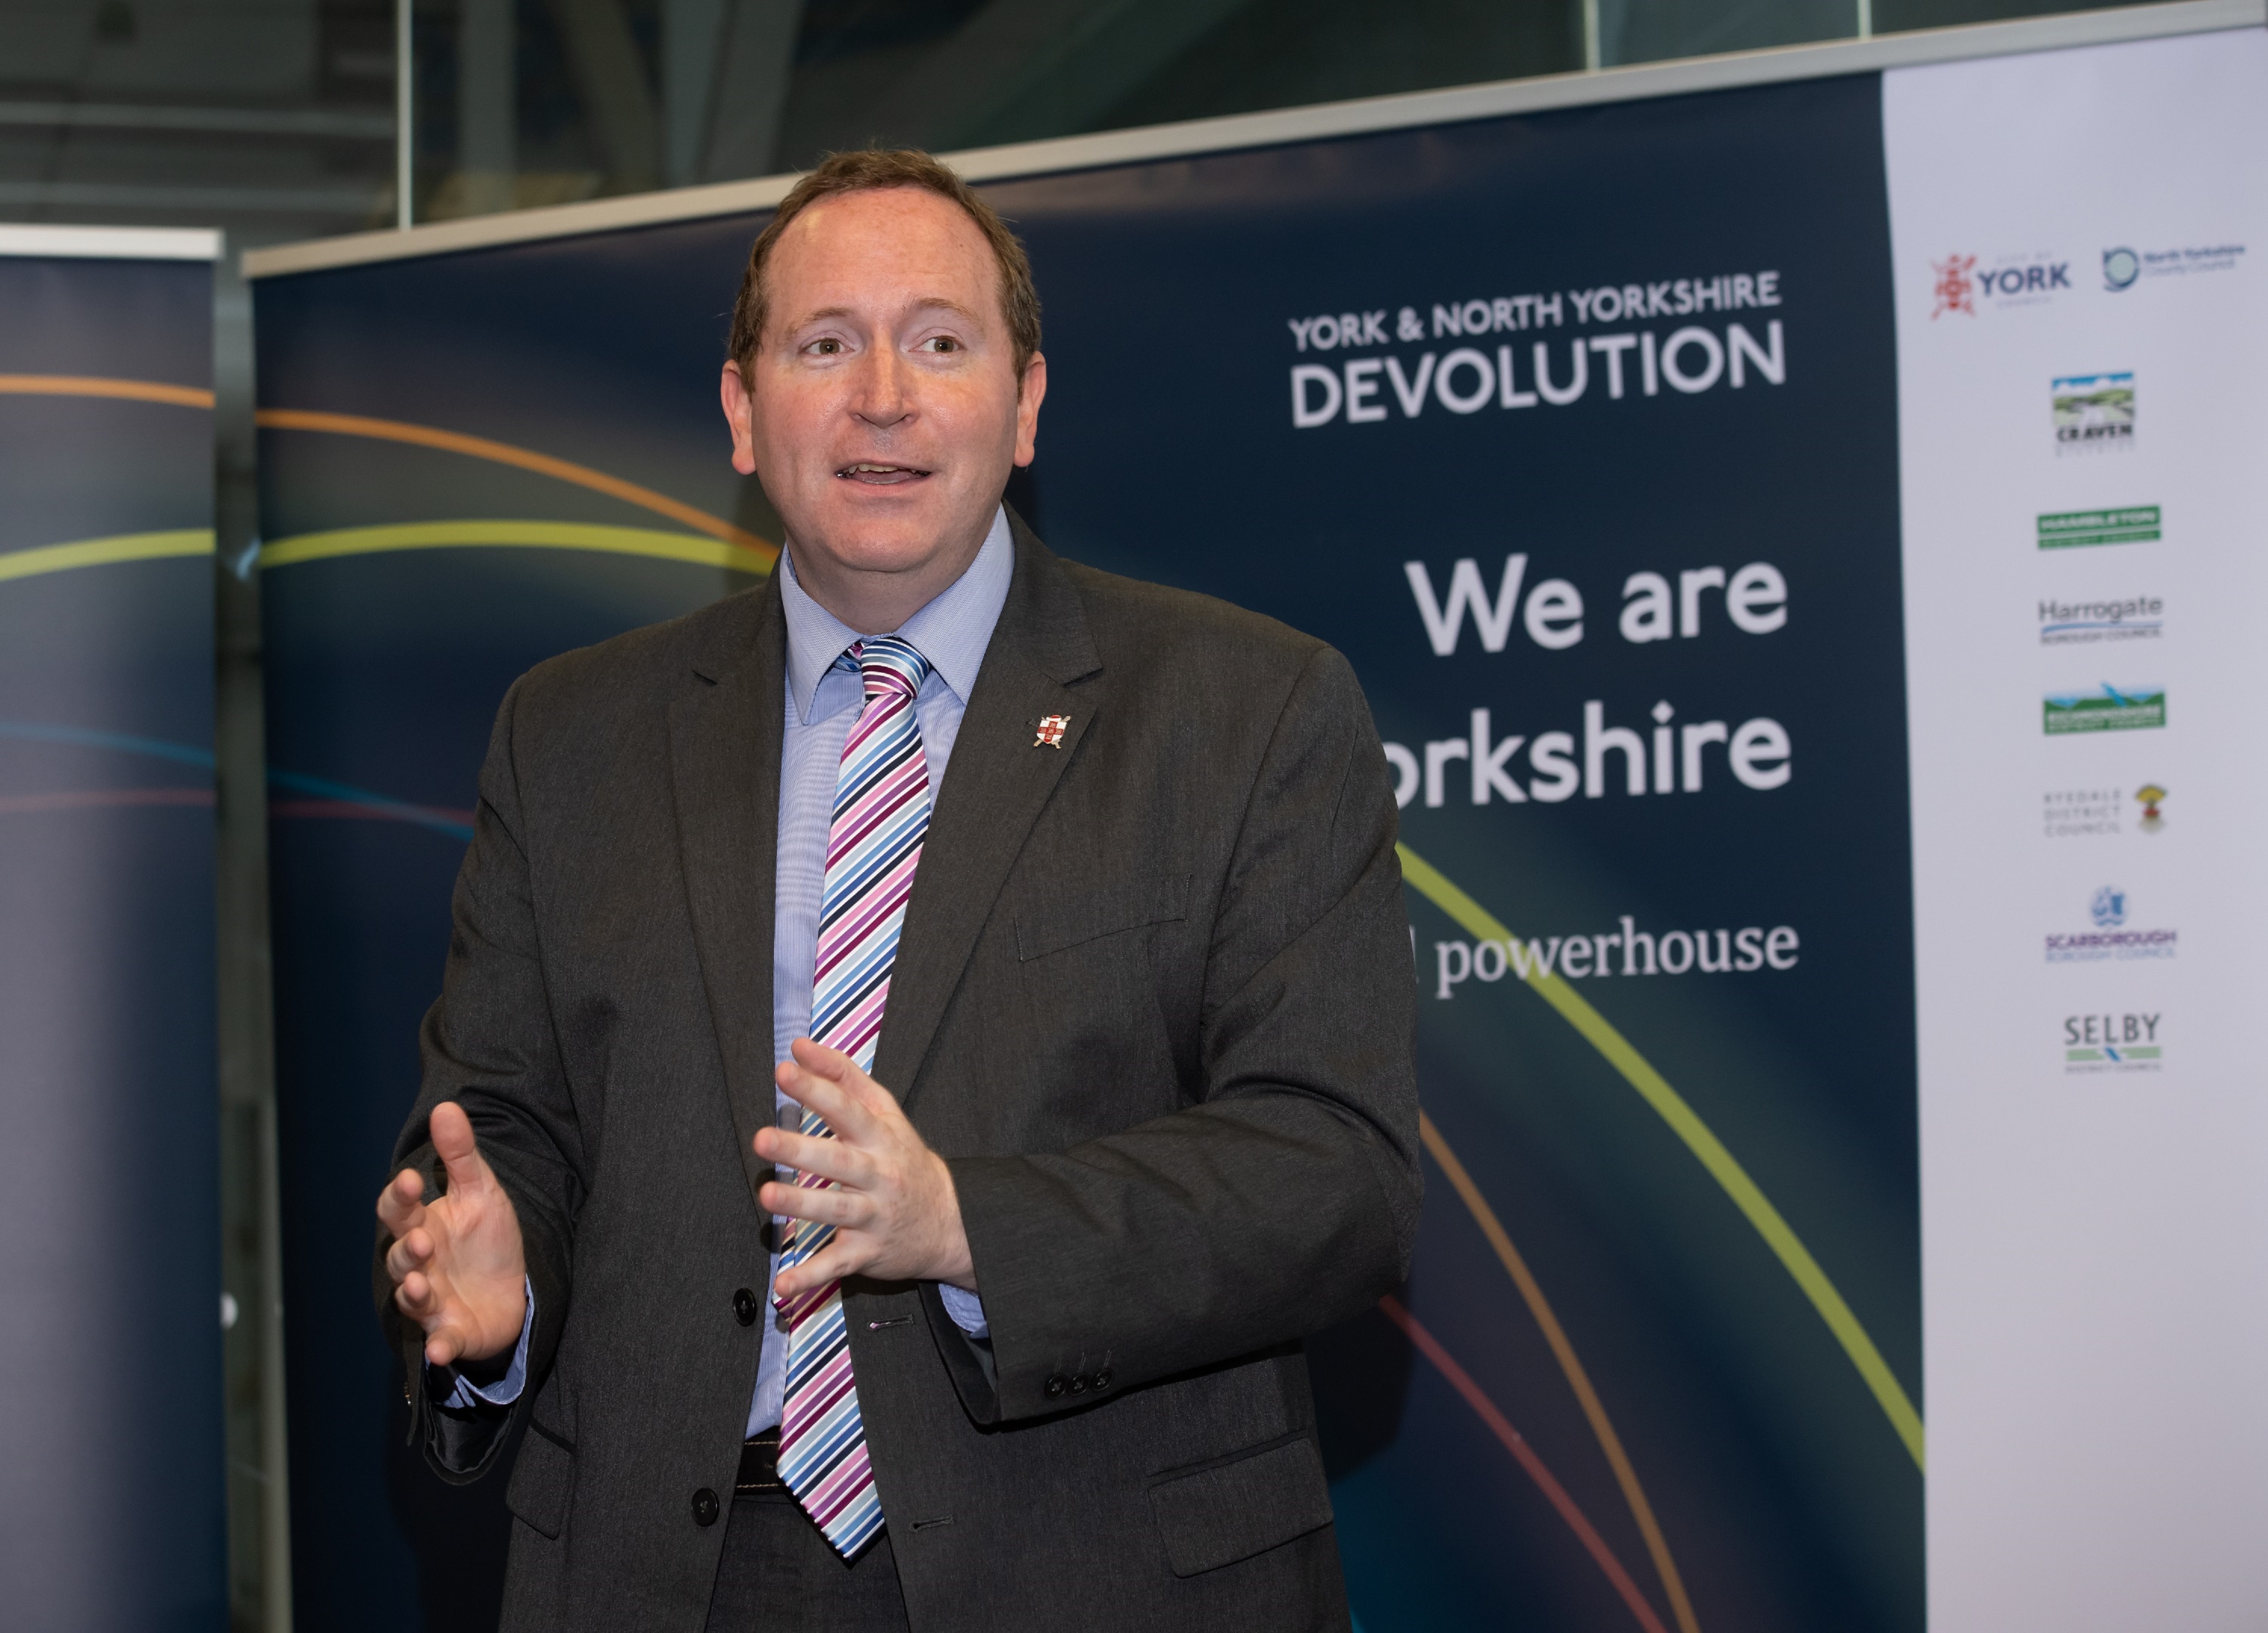 Cllr Keith Aspden at proposed devolution deal launch